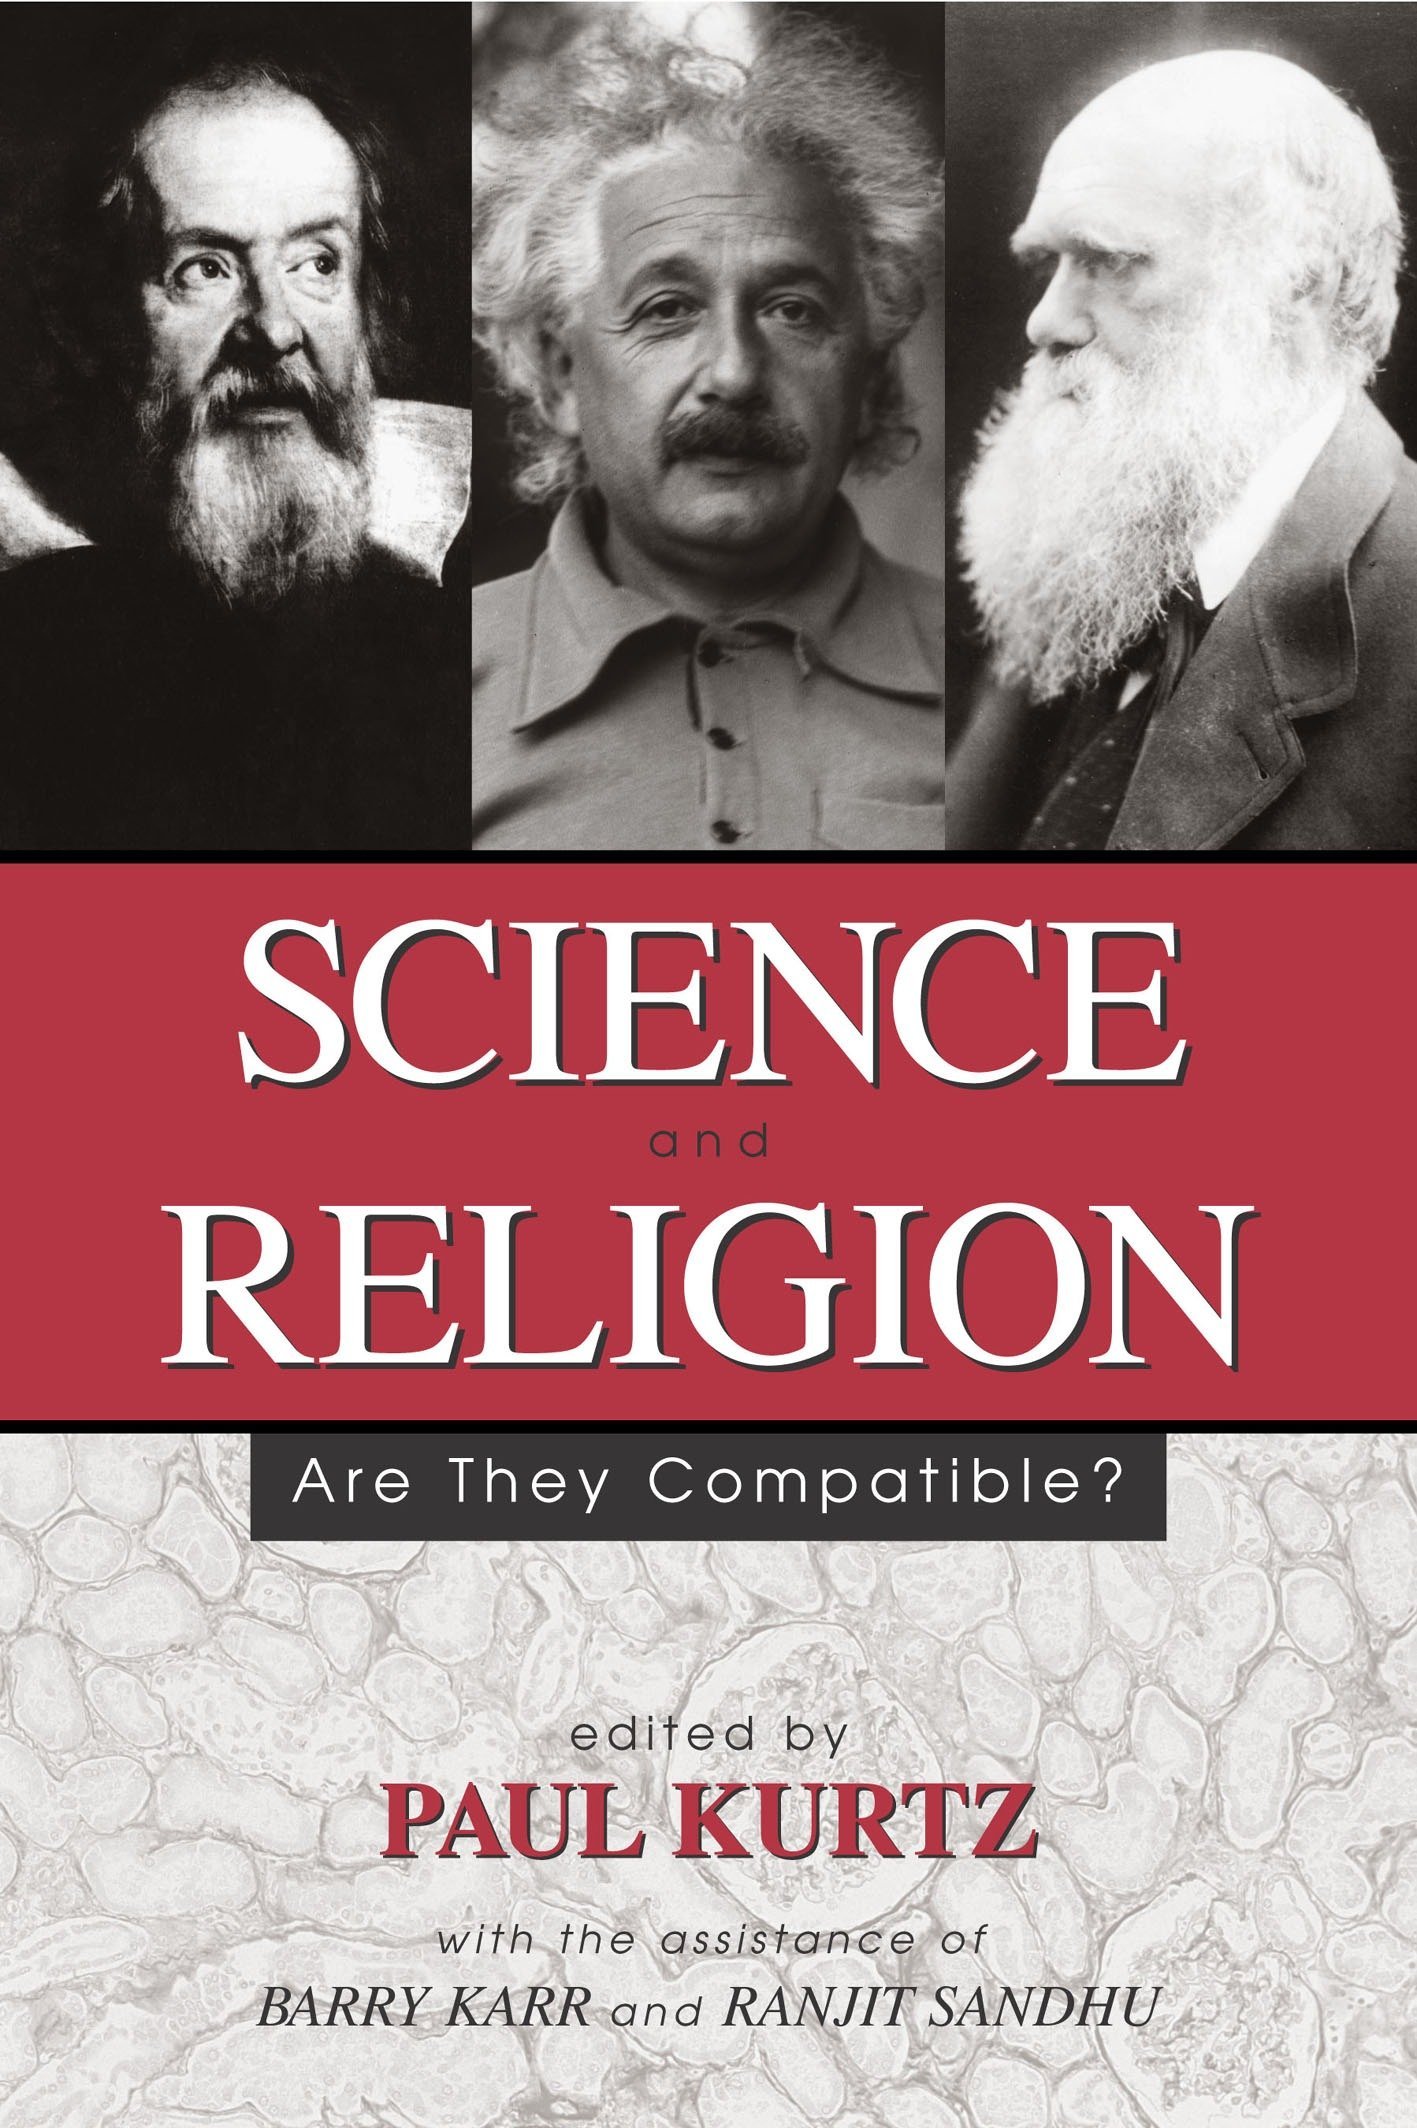 Book cover for Science and Religion: Are They Compatible? edited by Paul Kurtz.